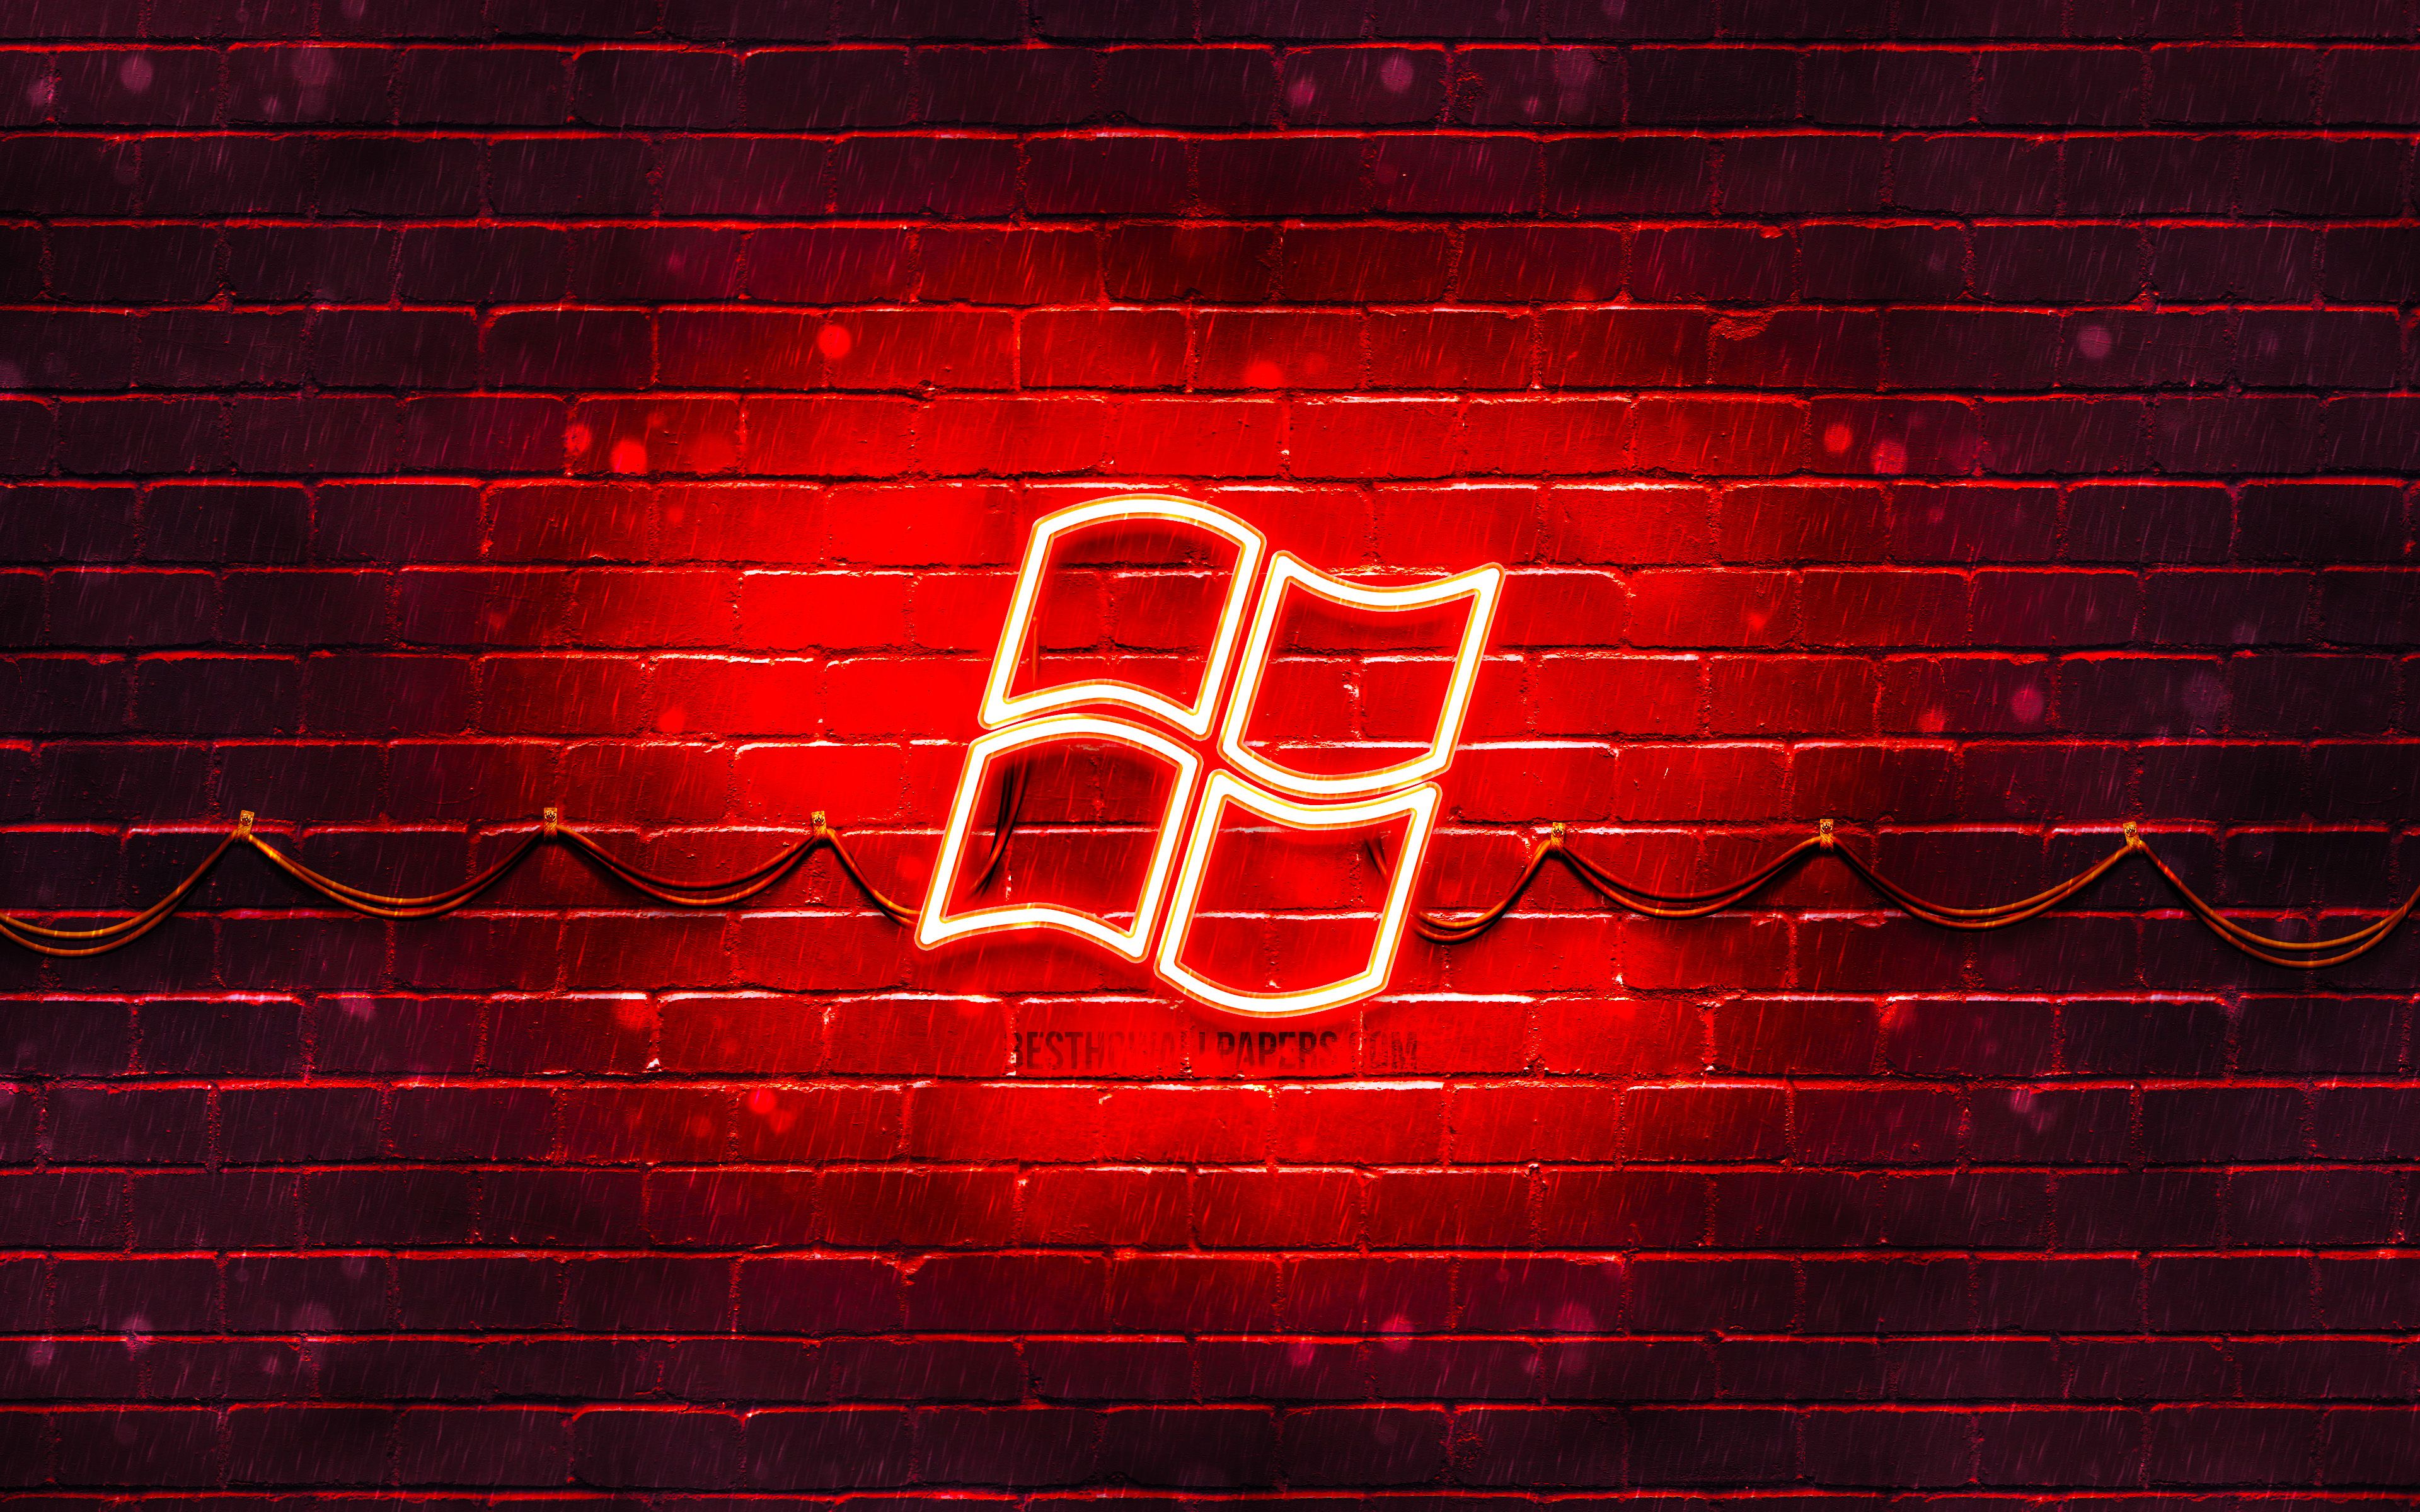 Download wallpaper Windows red logo, 4k, red brickwall, Windows logo, brands, Windows neon logo, Windows for desktop with resolution 3840x2400. High Quality HD picture wallpaper